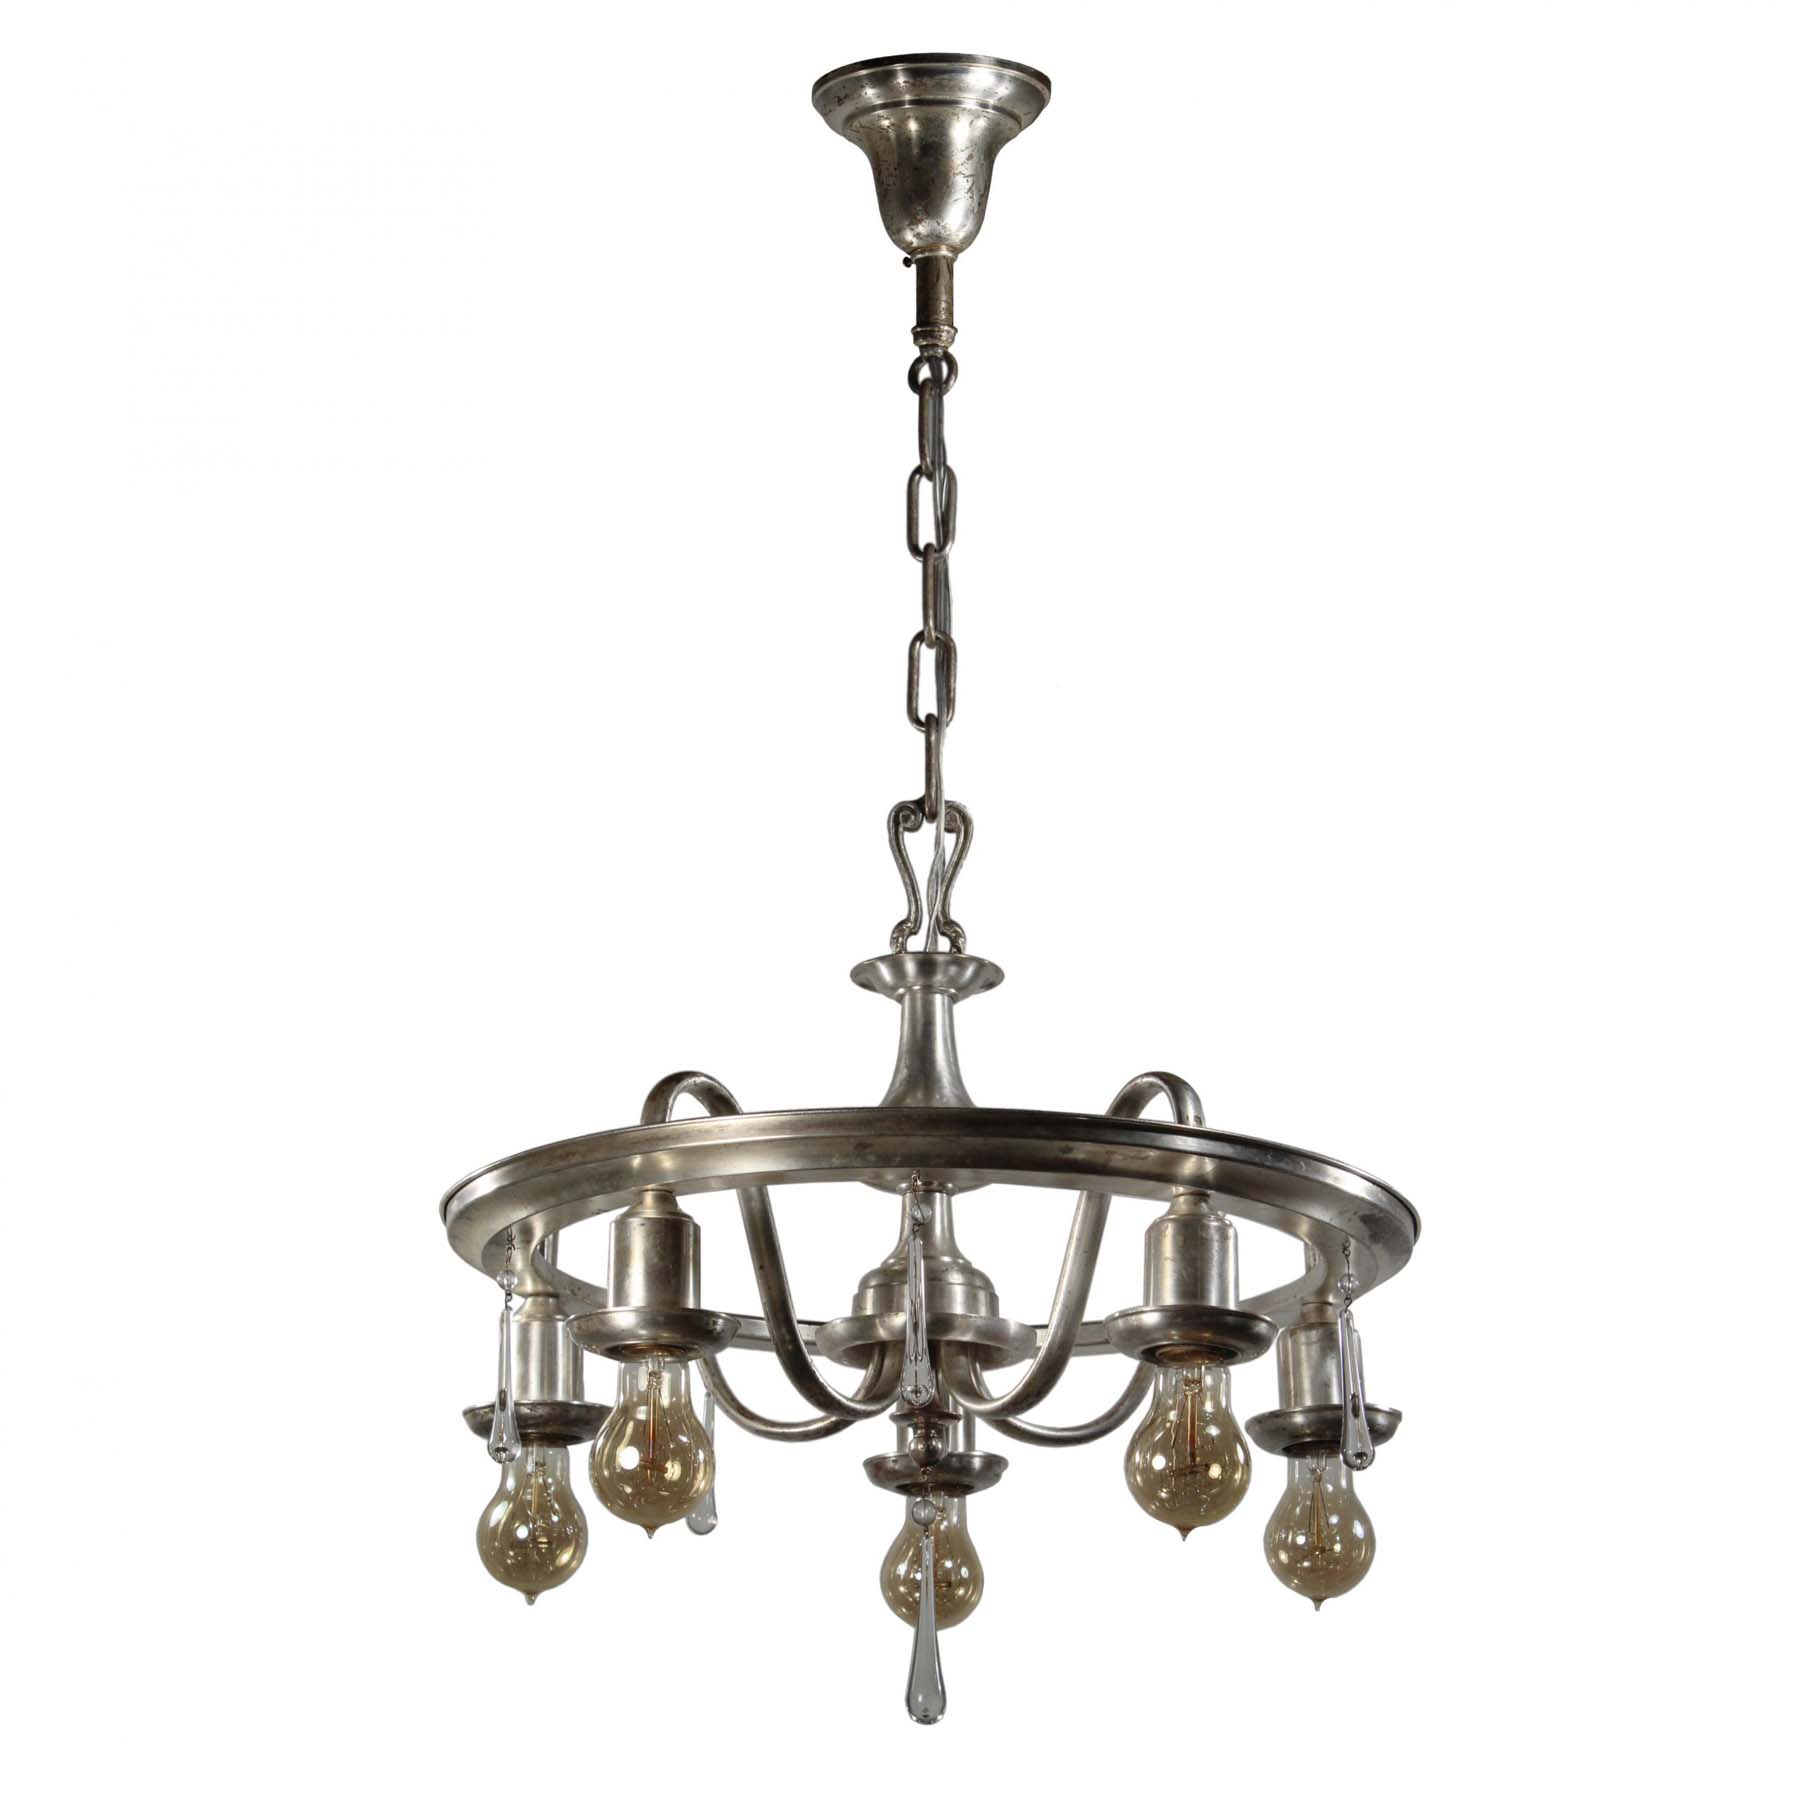 Neoclassical Silverplate Chandelier with Prisms, Antique Lighting-68963